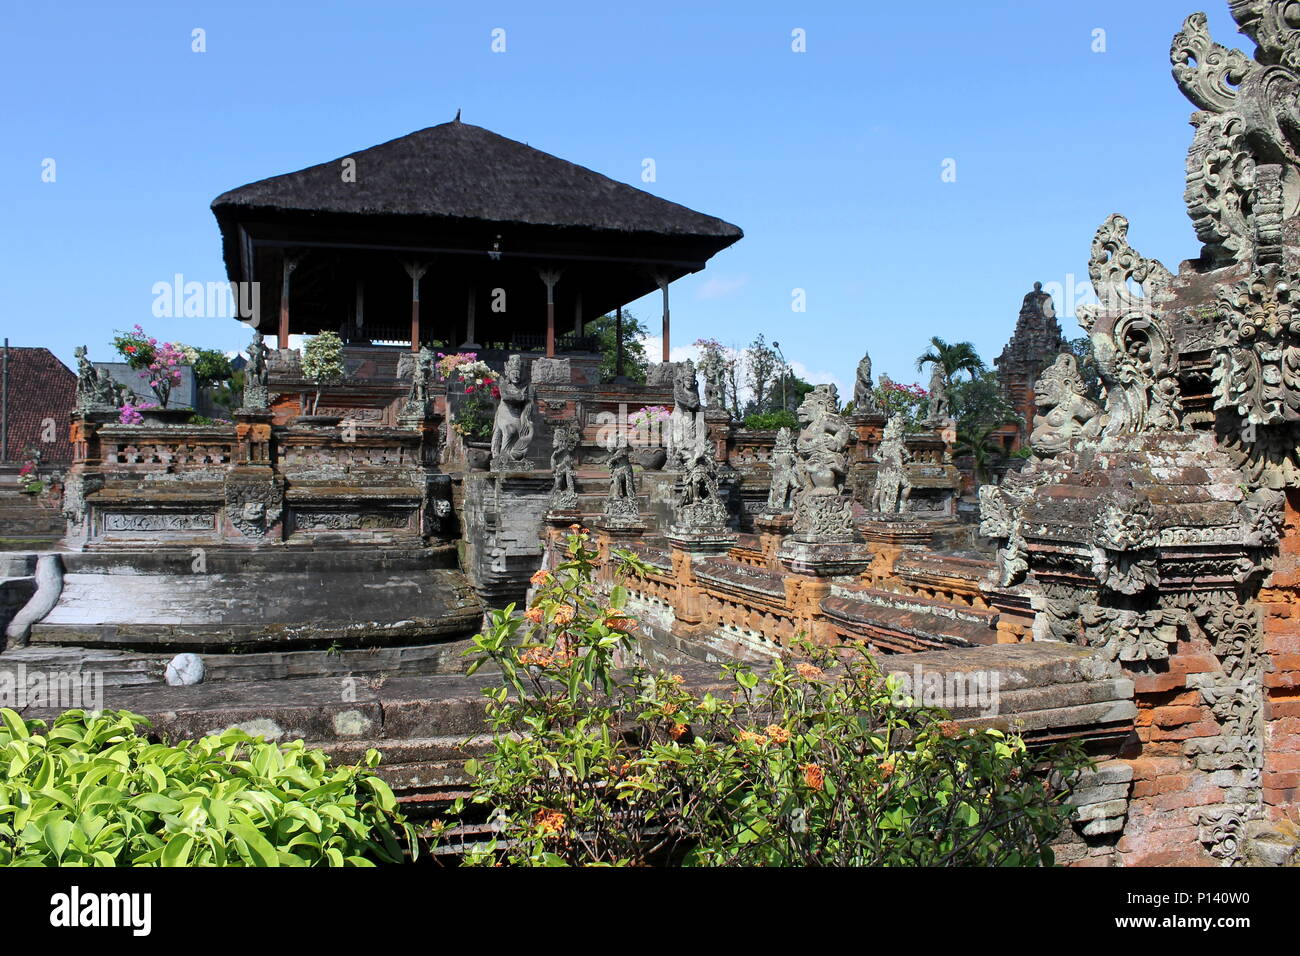 Klungkung Palace in Bali Stock Photo